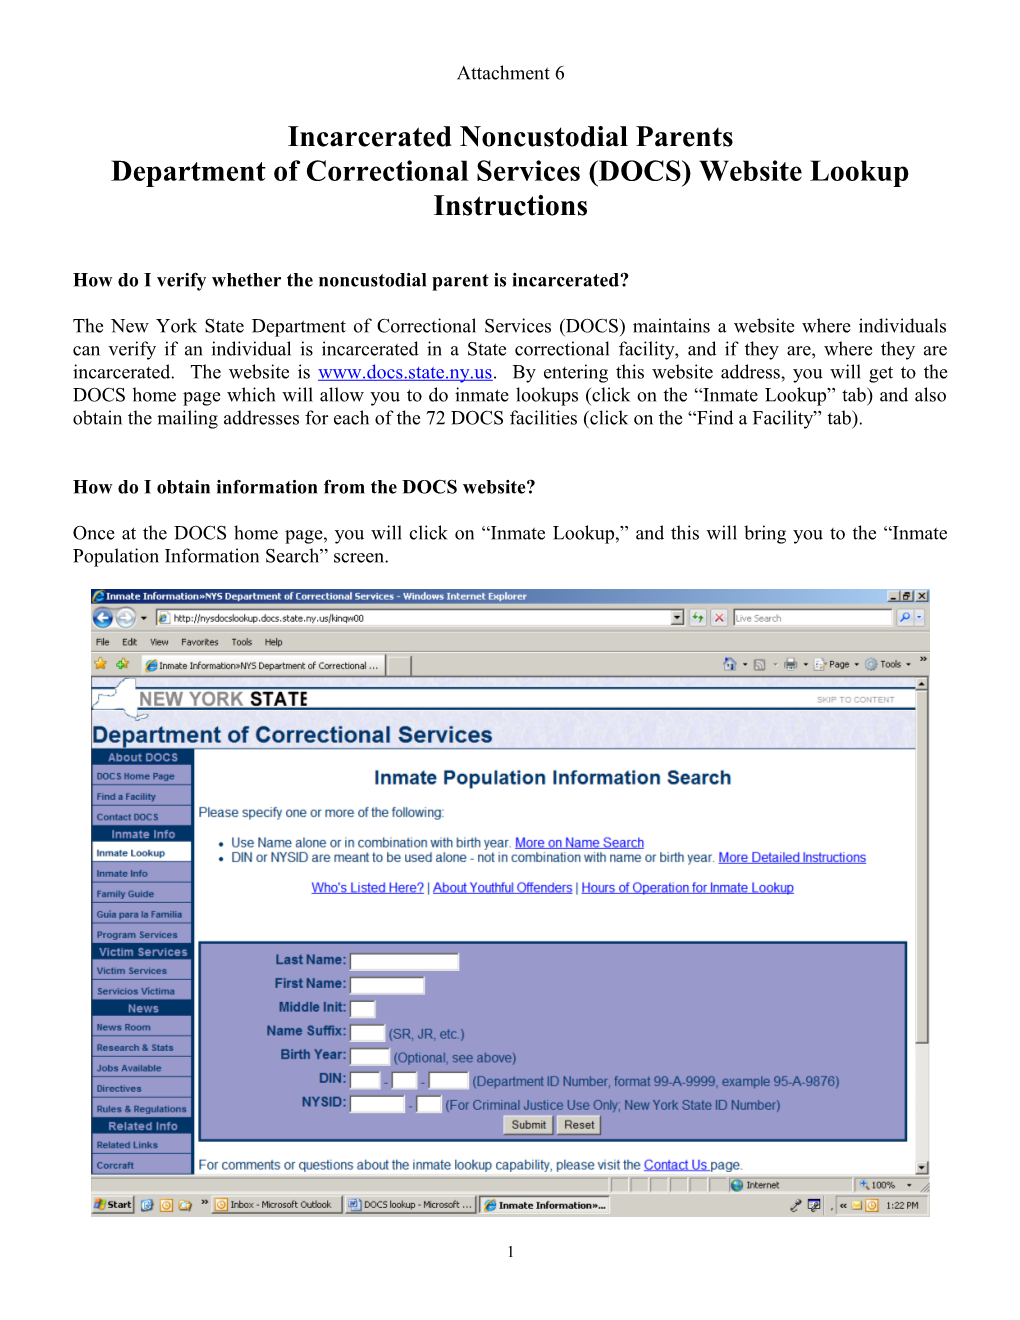 Department of Correctional Services (DOCS) Website Lookup Instructions